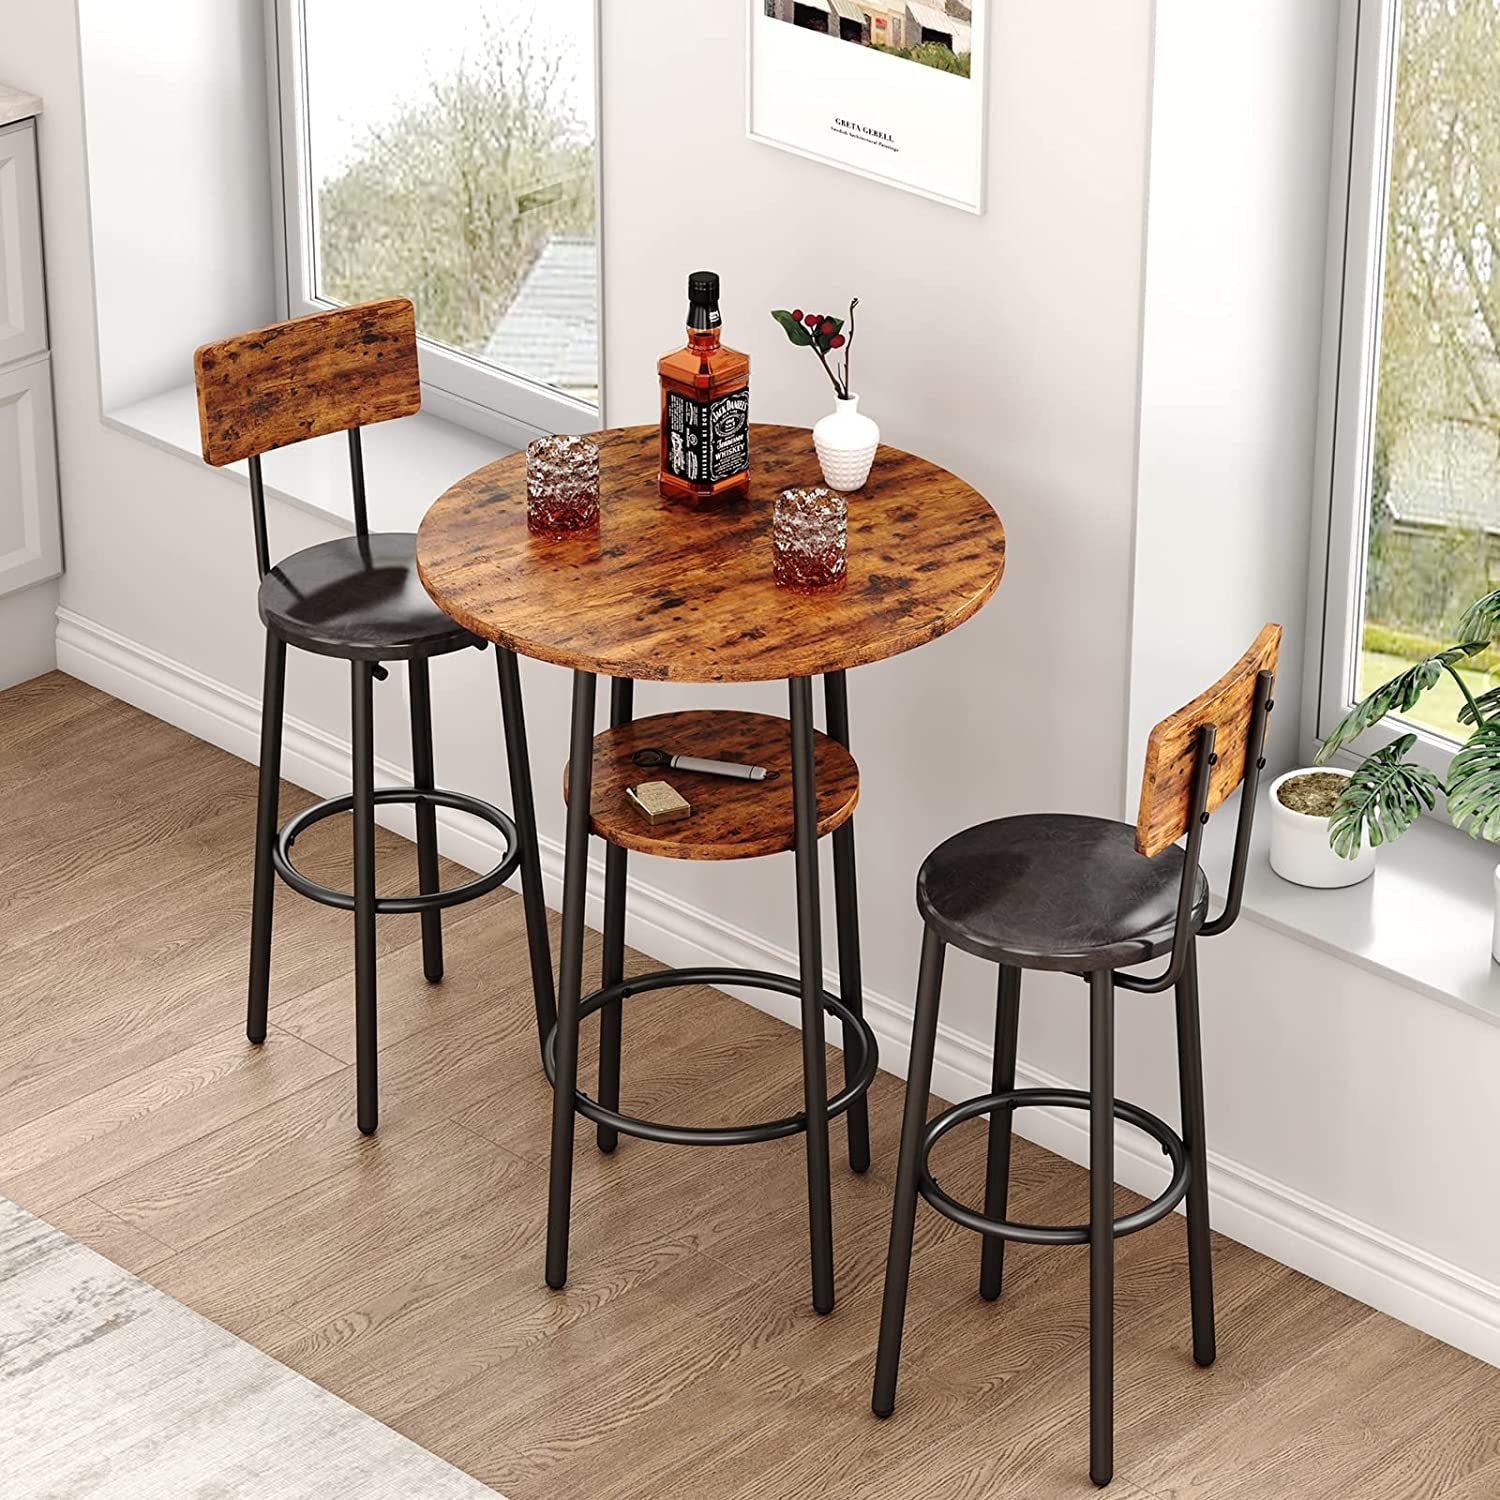 3-Piece Bar Table Set for 2, Small 2-Tier round Bistro Pub Dining Table & PU Upholstered Stools with Backrest, Counter Height Table and Chairs Set for Kitchen Small Space, Rustic Brown